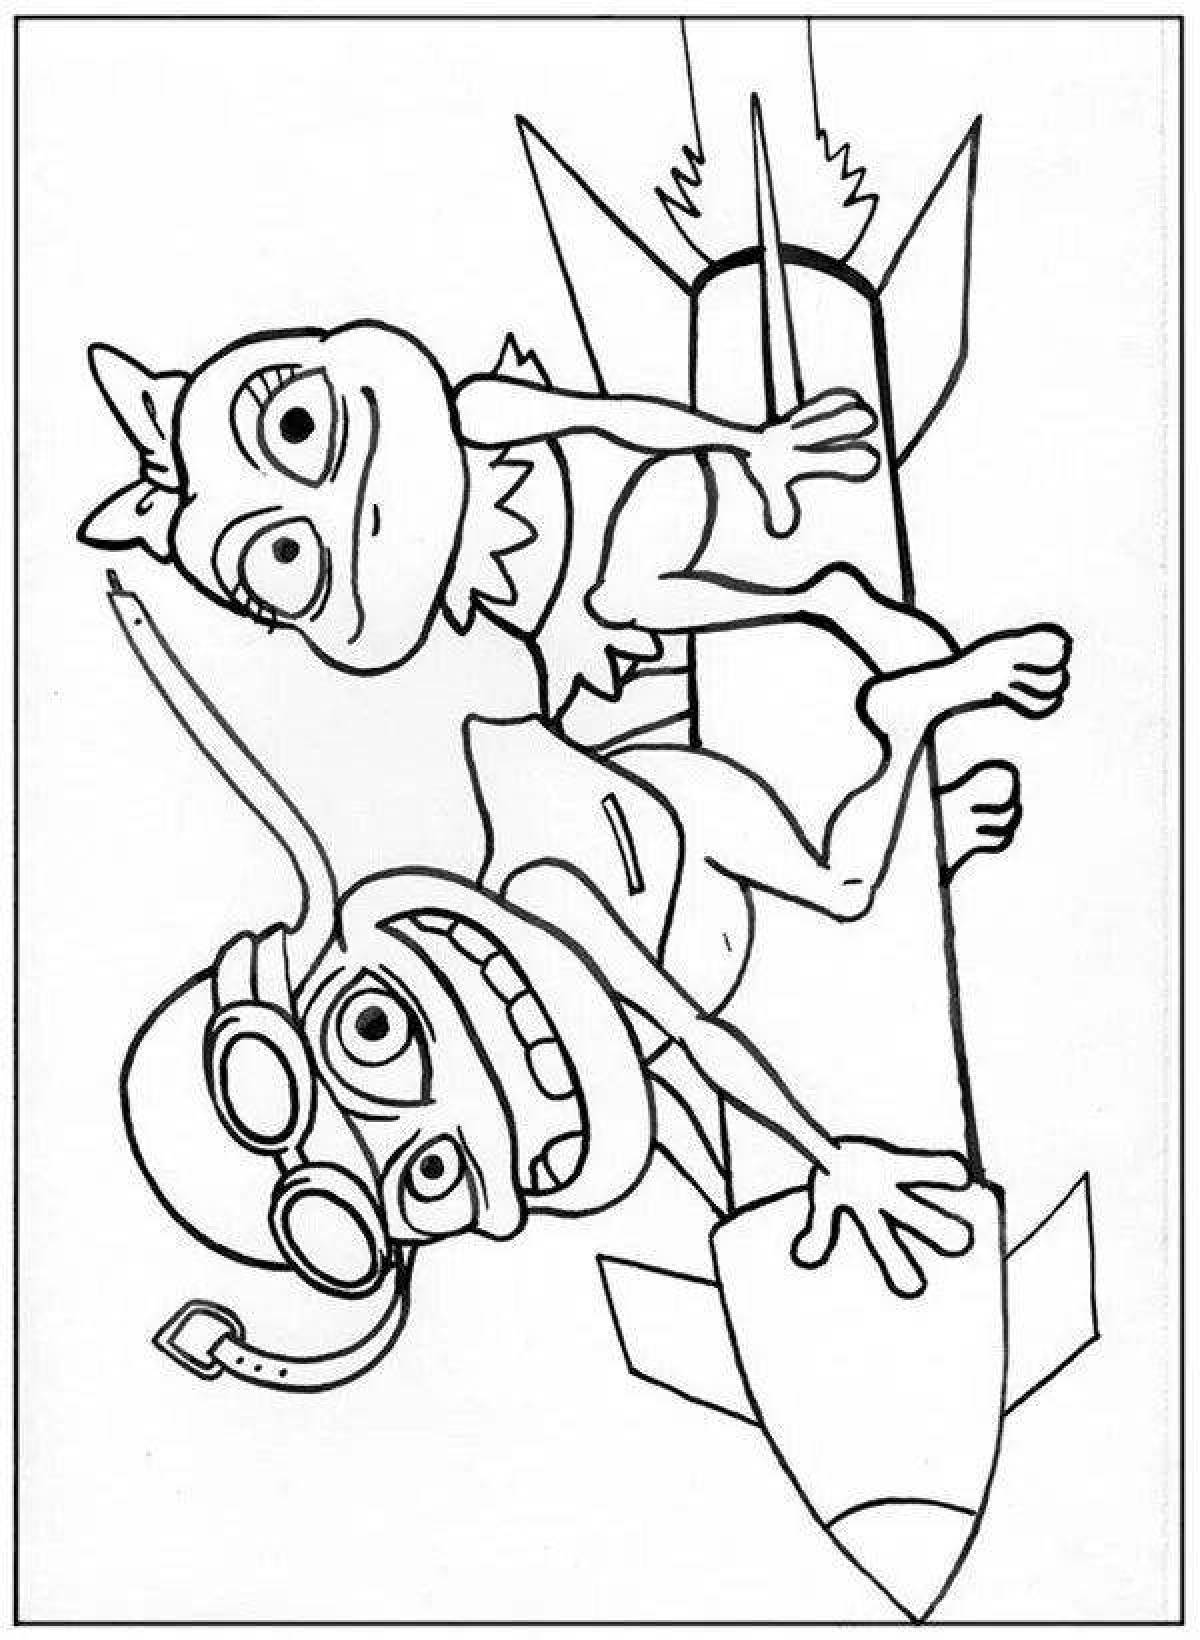 Colorful crazy frog coloring page